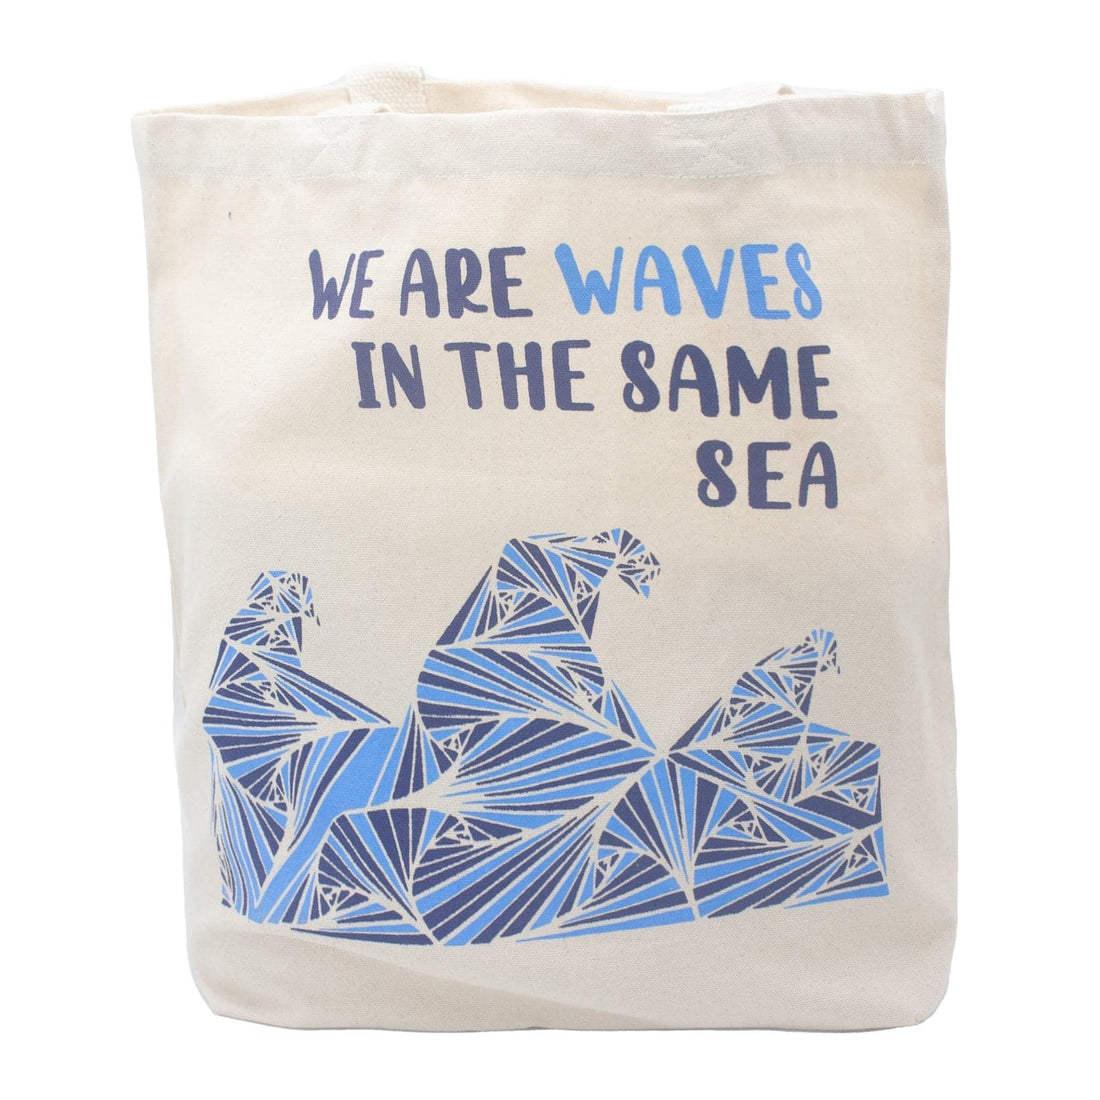 Printed Cotton Bag - We are Waves - Natural - best price from Maltashopper.com PCB-01C